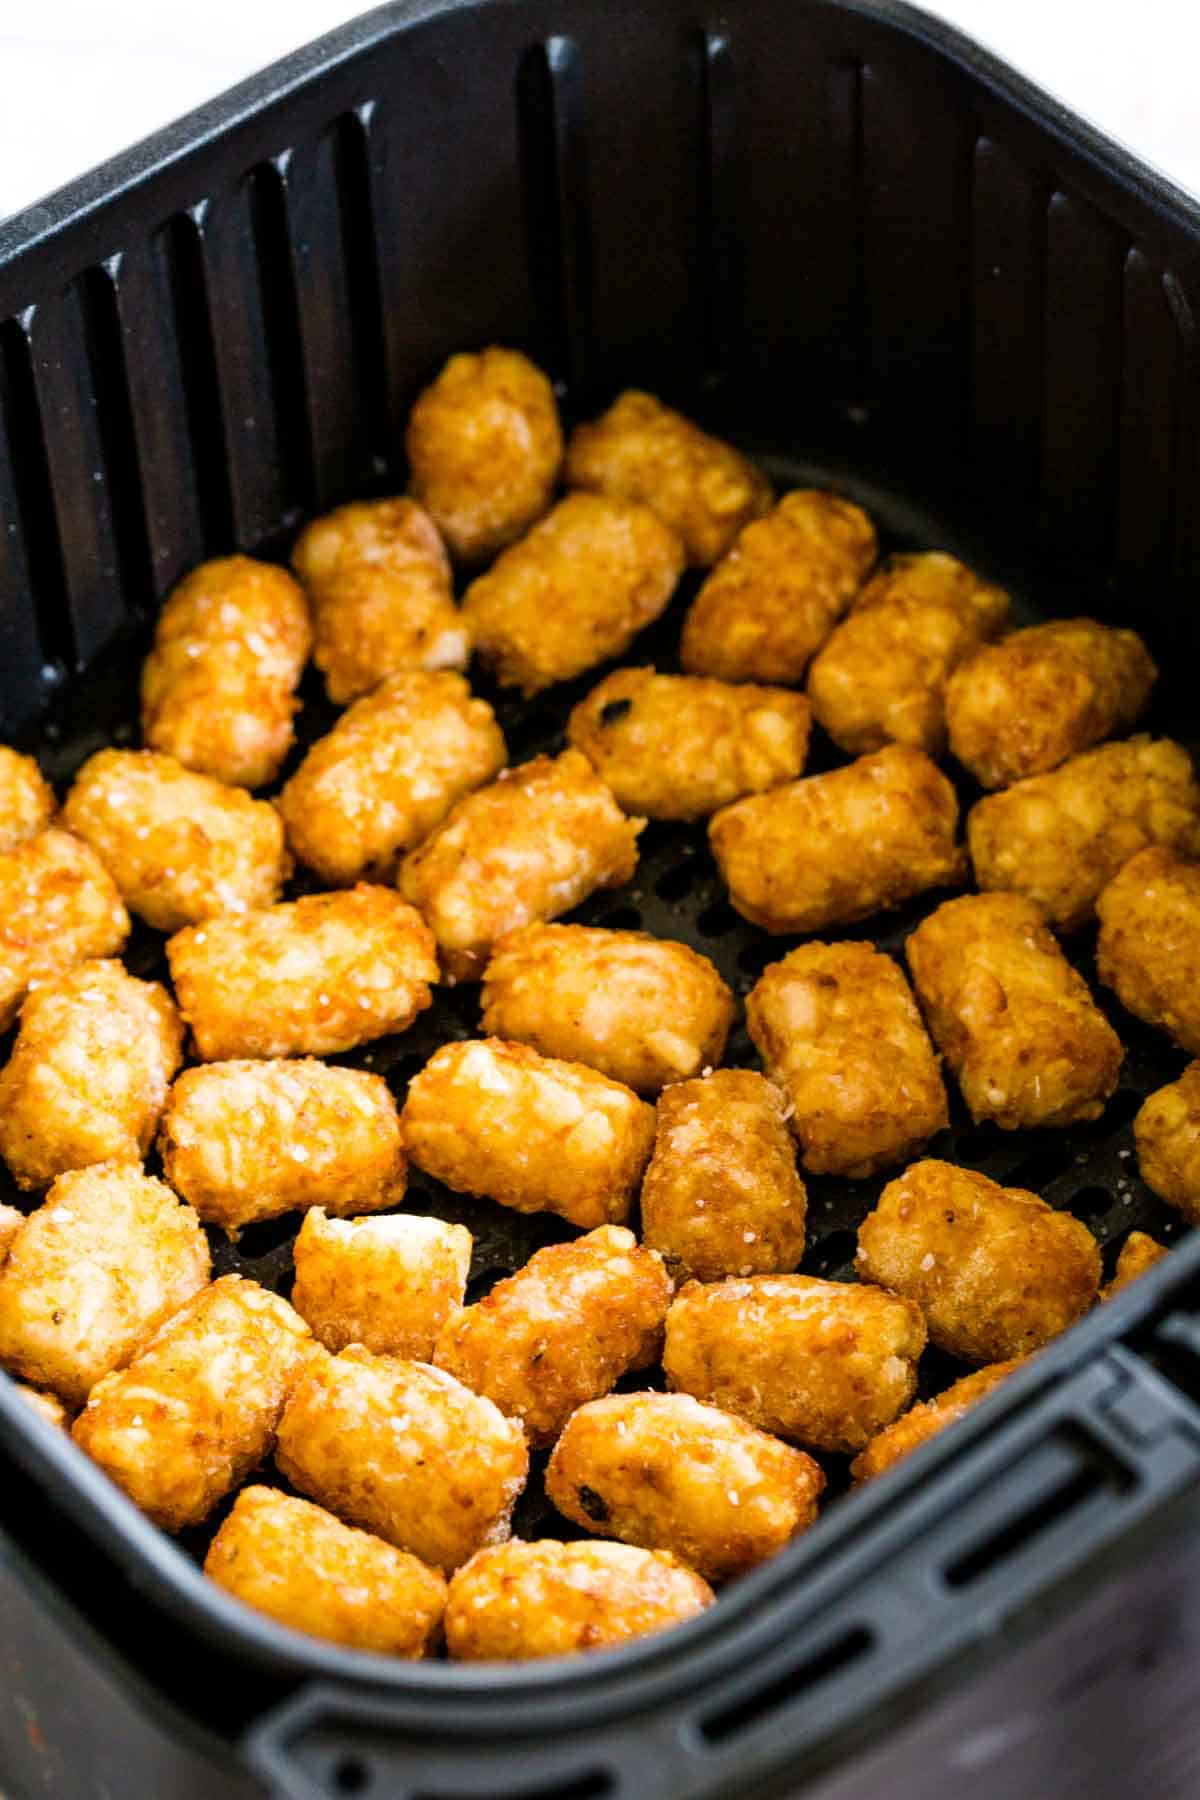 Tater tots cook in an air fryer.